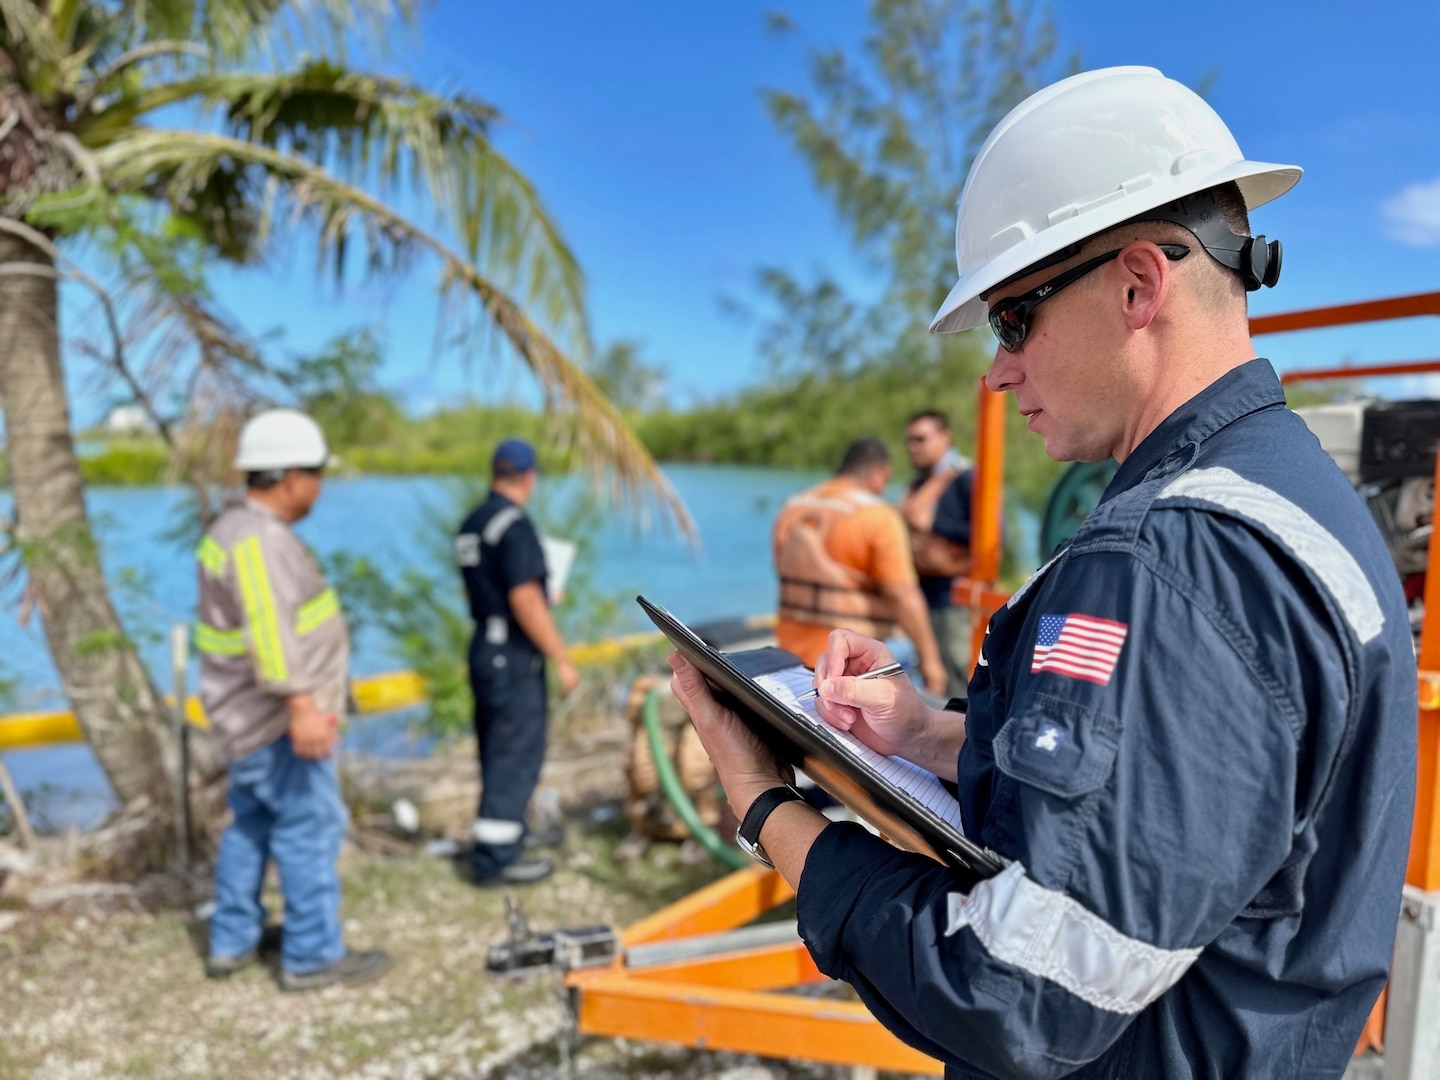 U.S. Coast Guard Forces Micronesia/Sector Guam personnel execute a Government-Initiated Unannounced Exercise (GIUE) at the Harbor of Refuge on Guam testing Supreme Petroleum, a key player in Guam's petroleum industry, and their contracted responder OSROCO, on May 1, 2024. The drill, run and evaluated by personnel from the Guam-based U.S. Coast Guard Emergency Management and Force Readiness, Prevention, and Incident Management divisions, simulated an oil spill scenario to guarantee safety, appropriate notifications, and prompt response actions. The primary mission was to evaluate the facility's ability to execute response plans swiftly and efficiently under real-world conditions, which they met satisfactorily. (U.S. Coast Guard photo by Chief Warrant Officer Sara Muir)